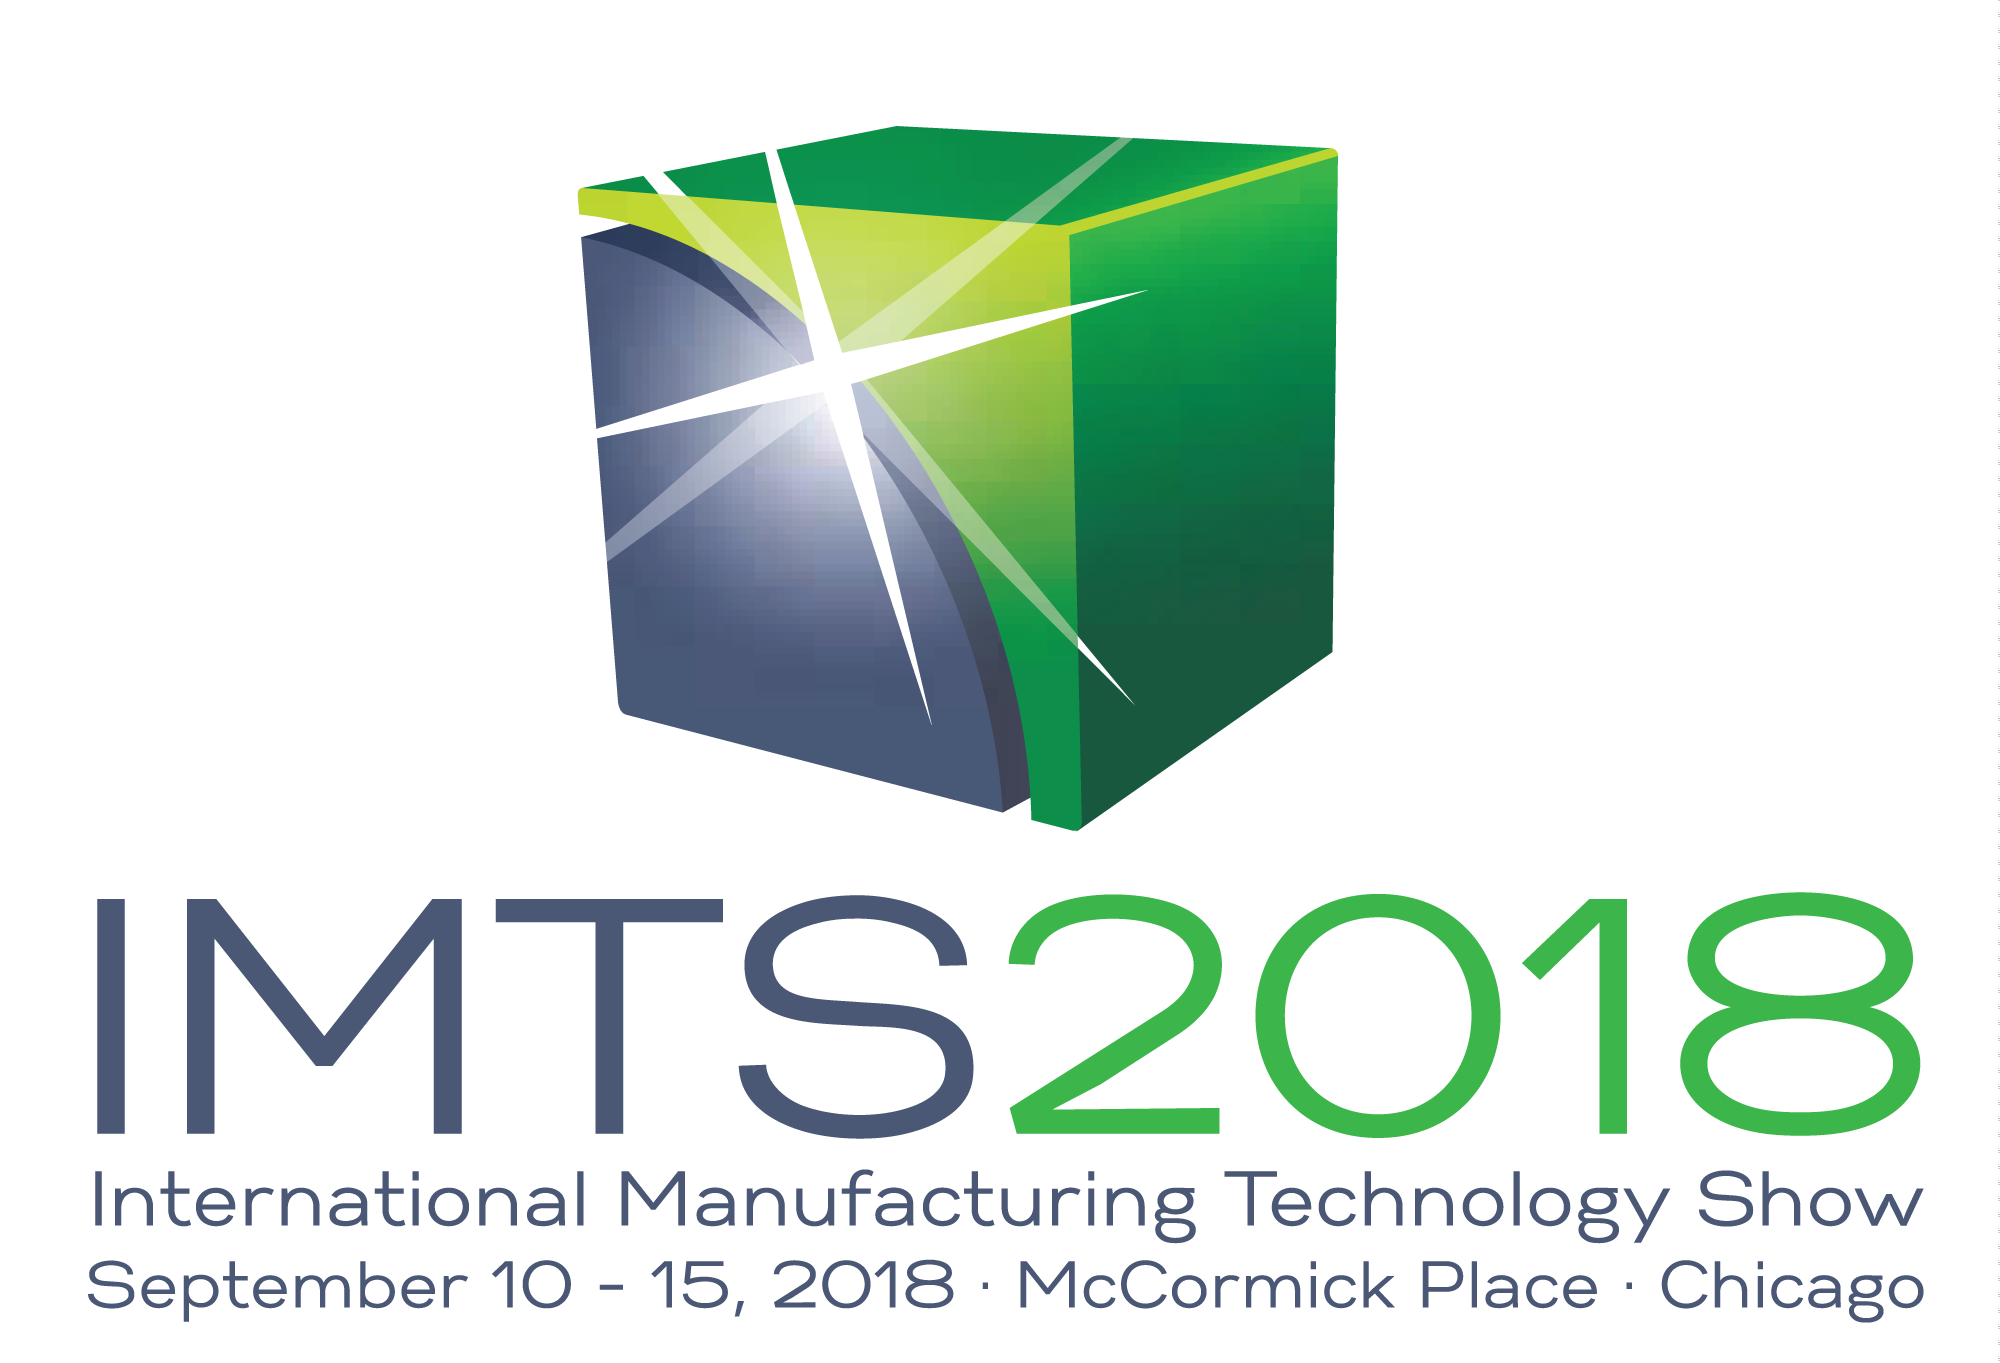 U.S. Nameplate Co. exhibits at IMTS